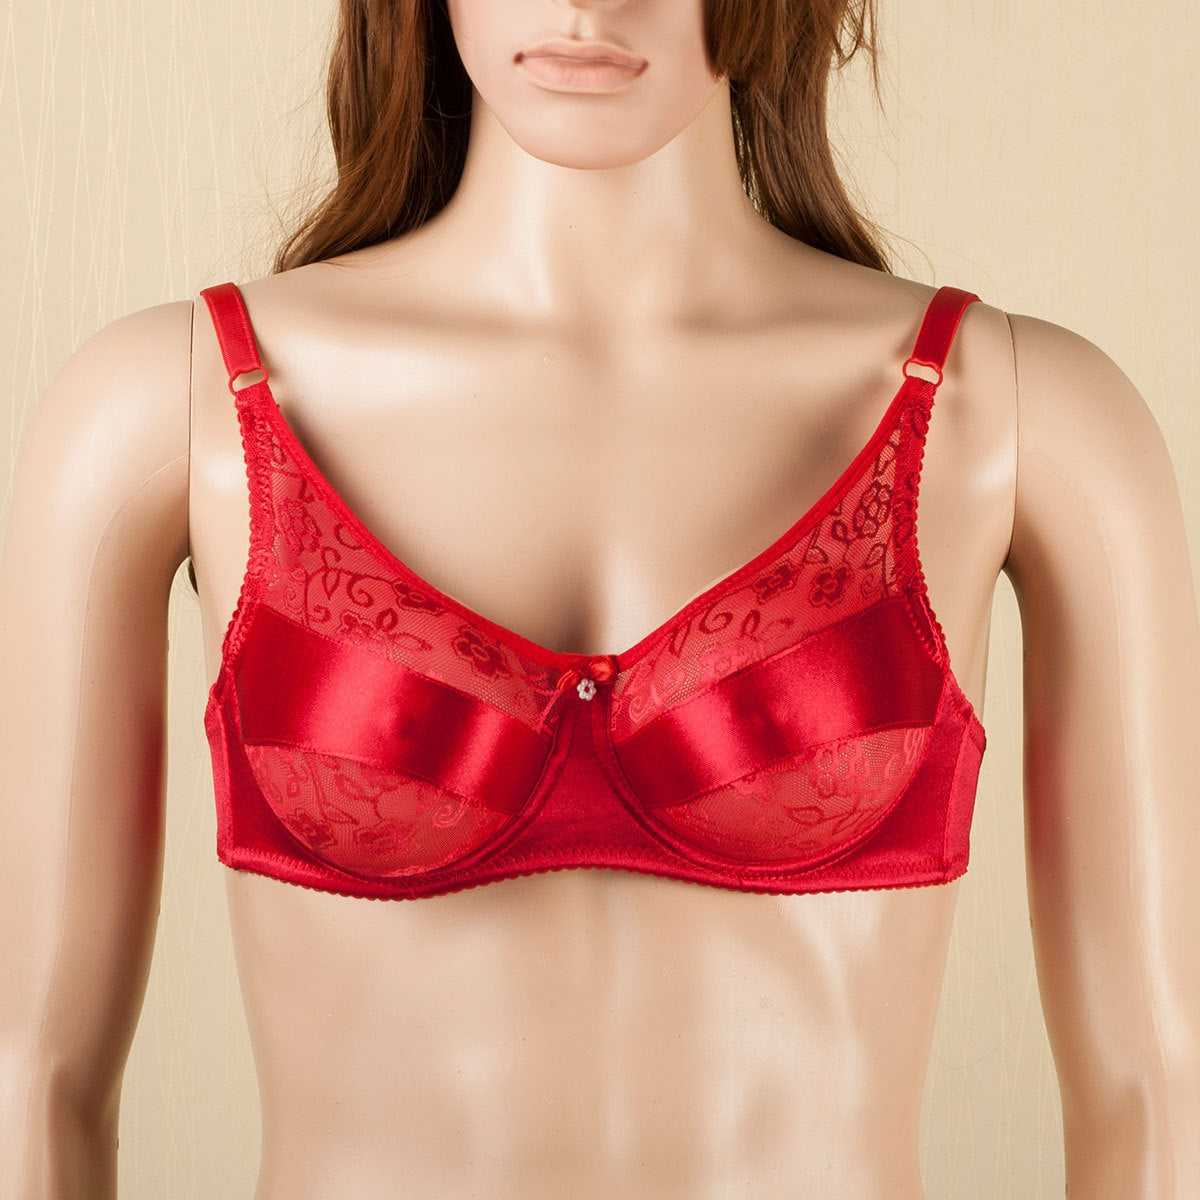 Teardrop Shaped Silicone Breast Forms with Red Pocket Bra